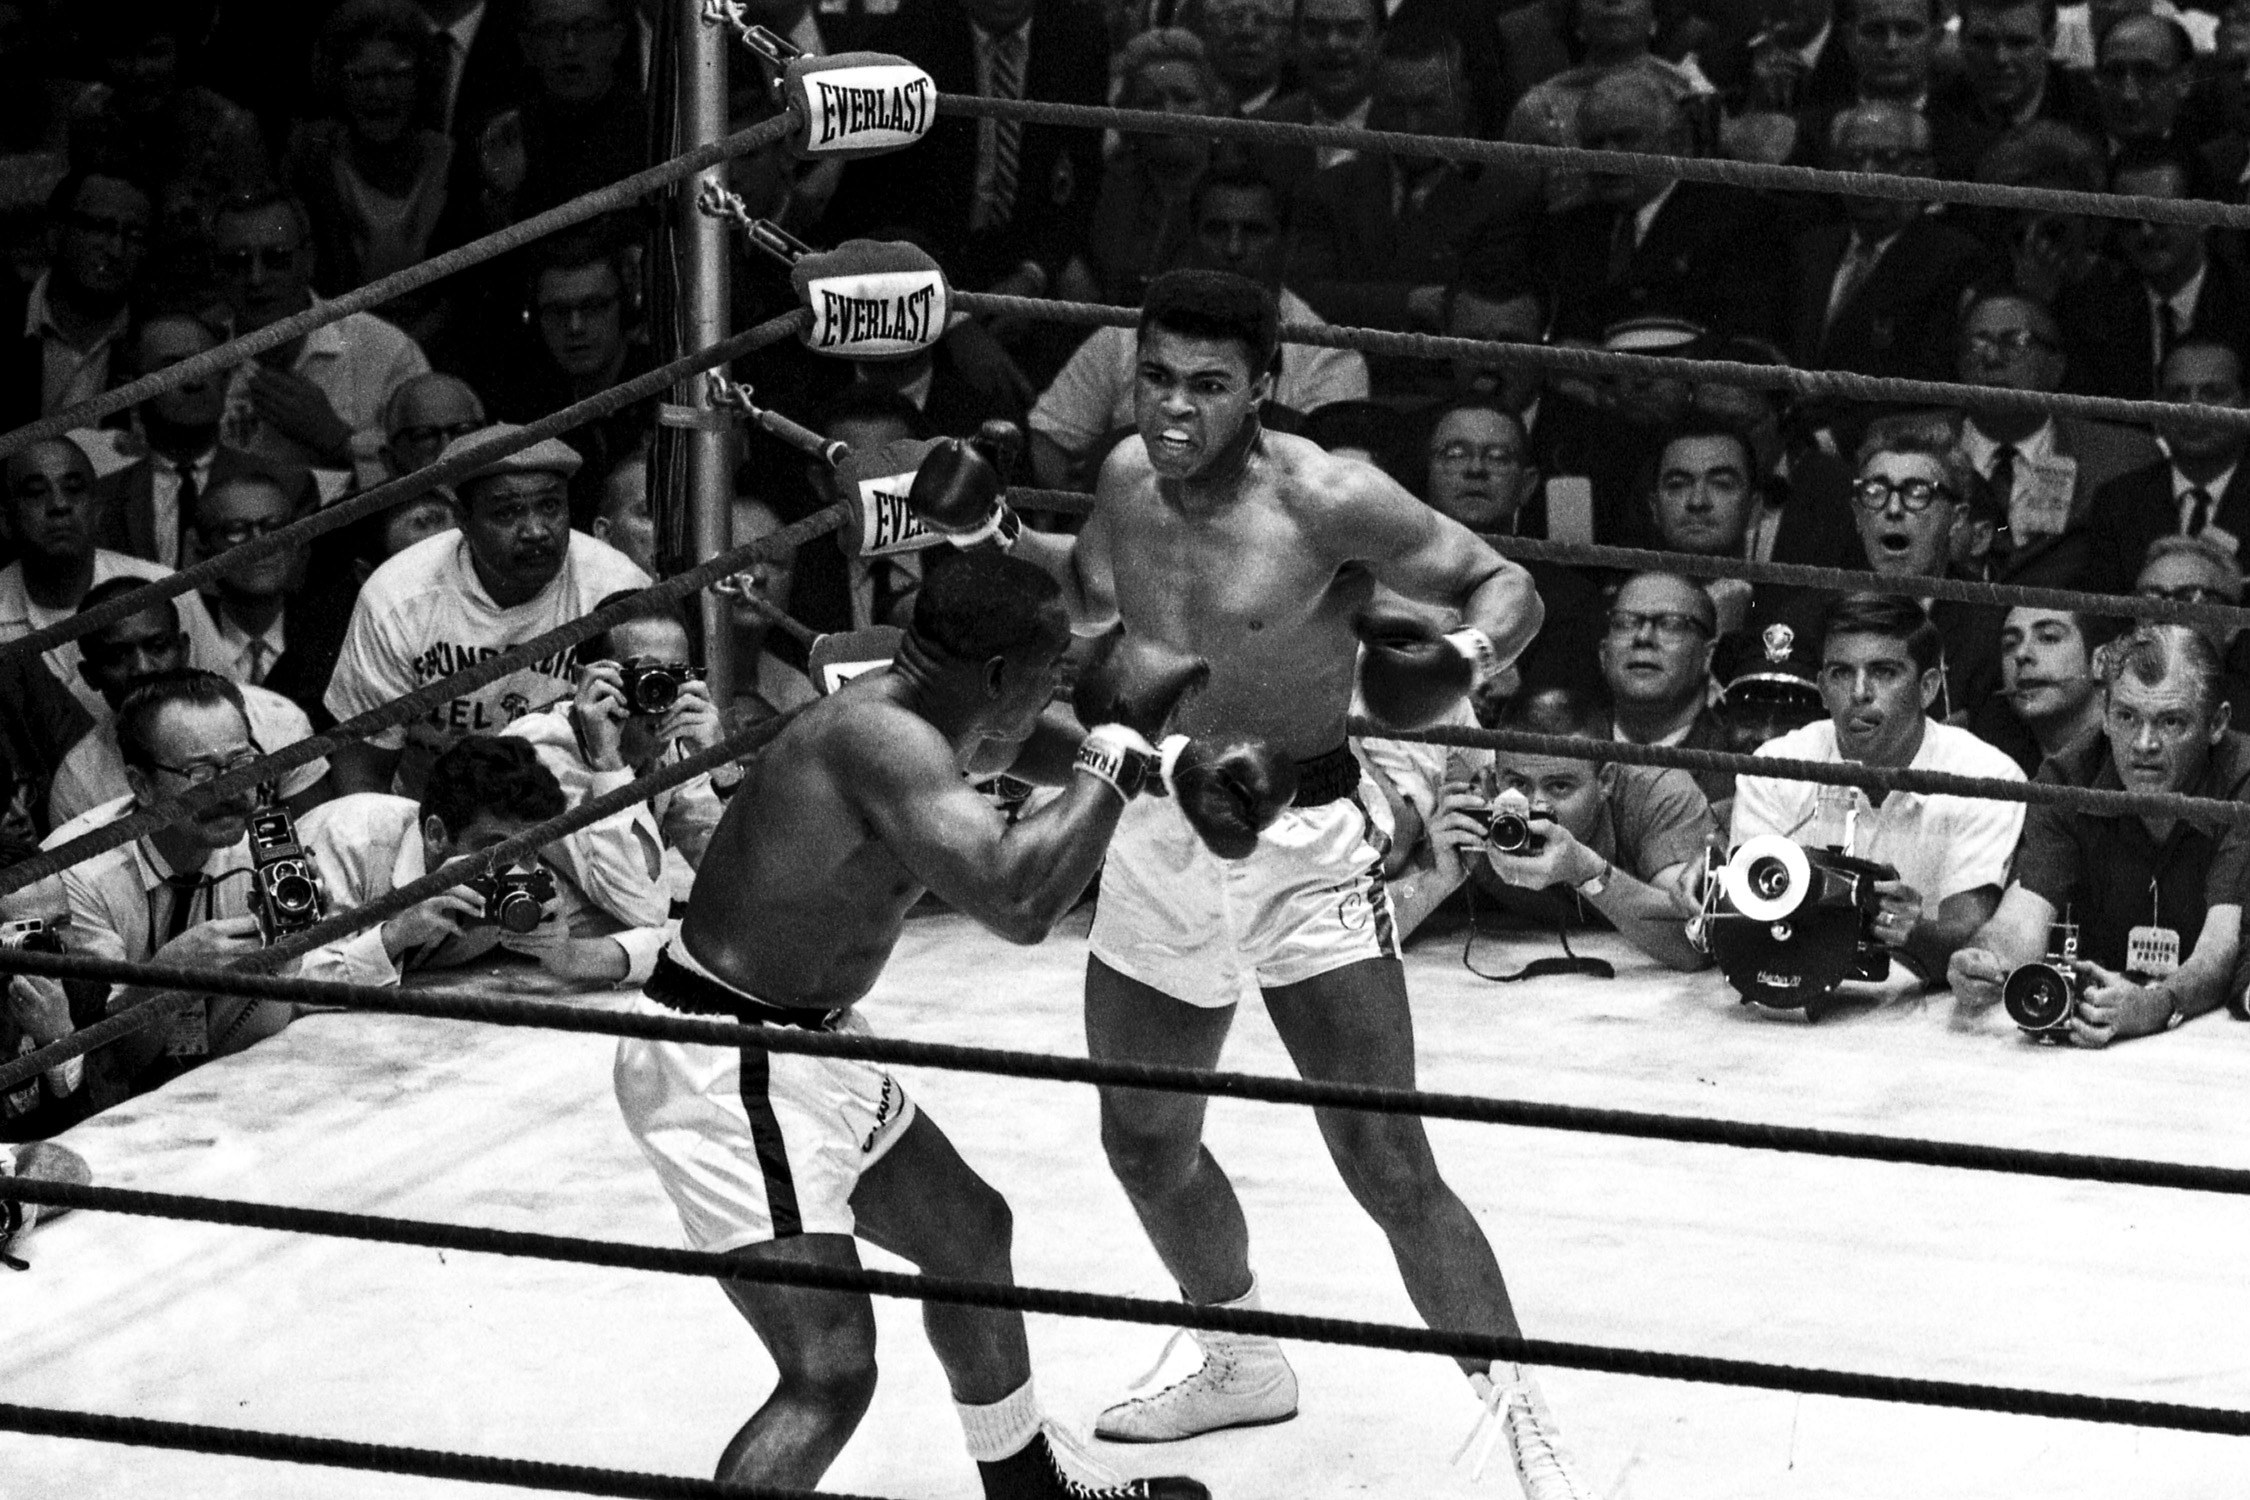 Muhammad Ali in the ring with opponent Sonny Liston. In the background are spectators in the audience.